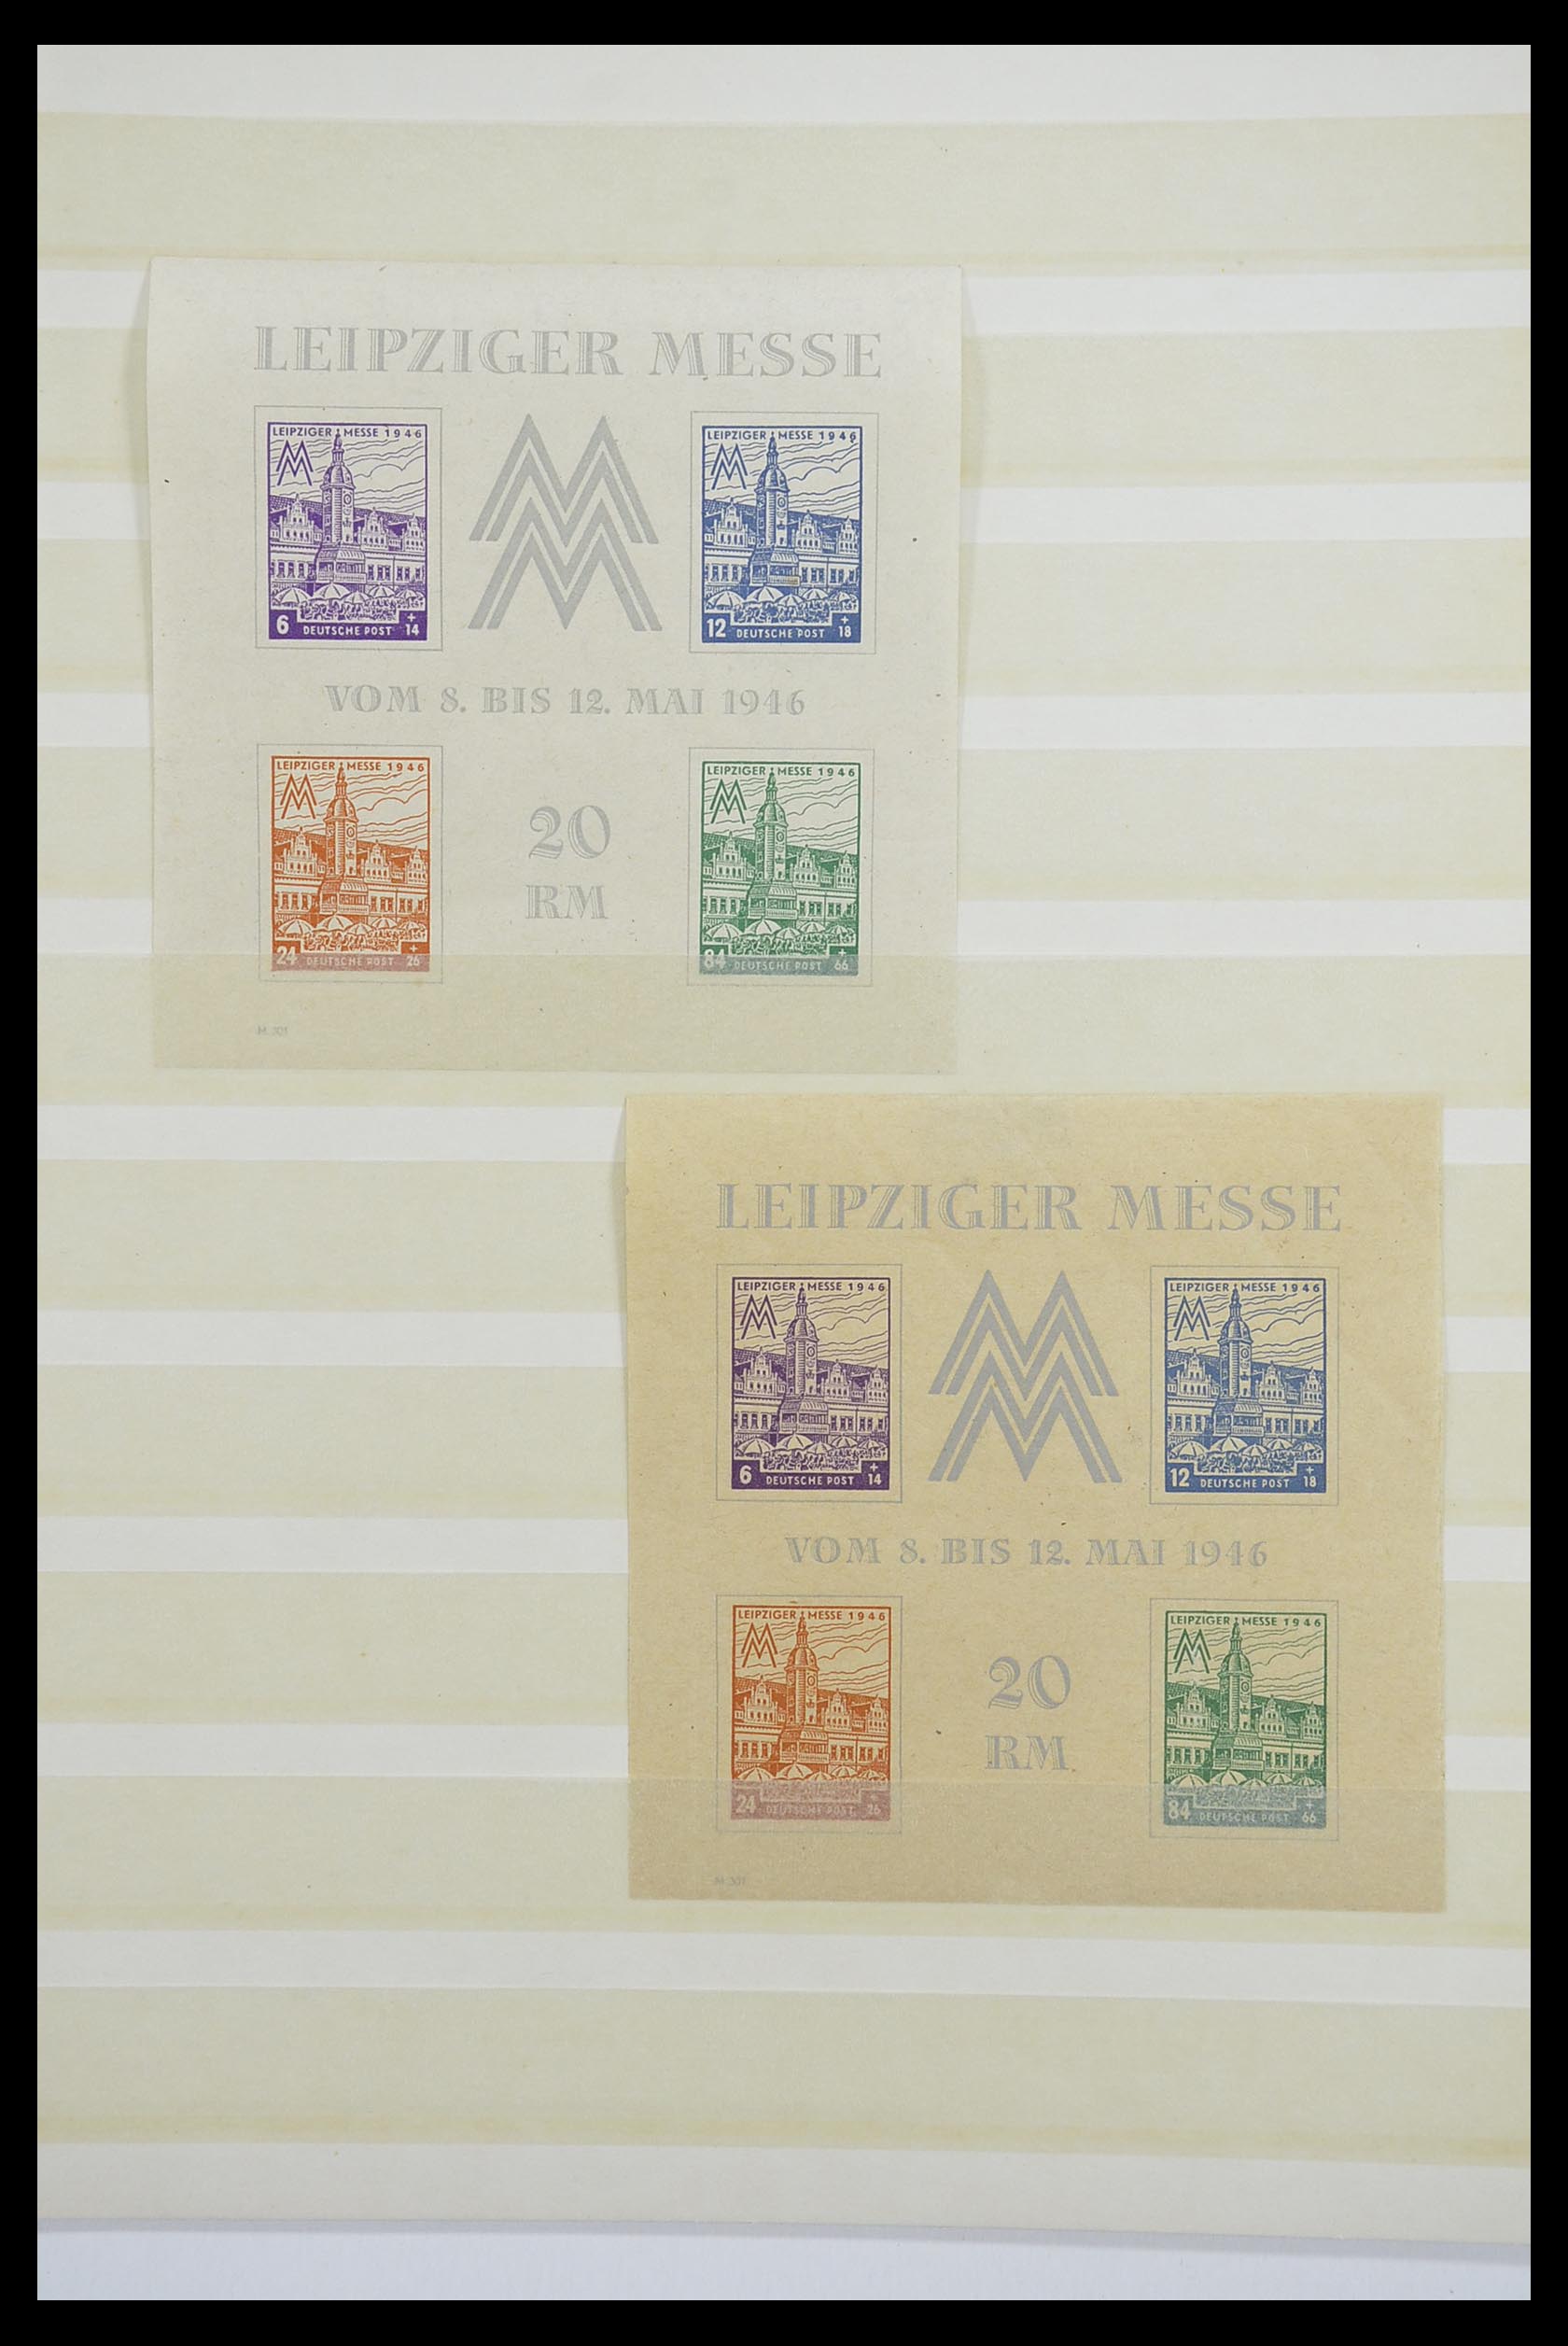 33268 011 - Stamp collection 33268 German local post and Sovjetzone 1945-1949.